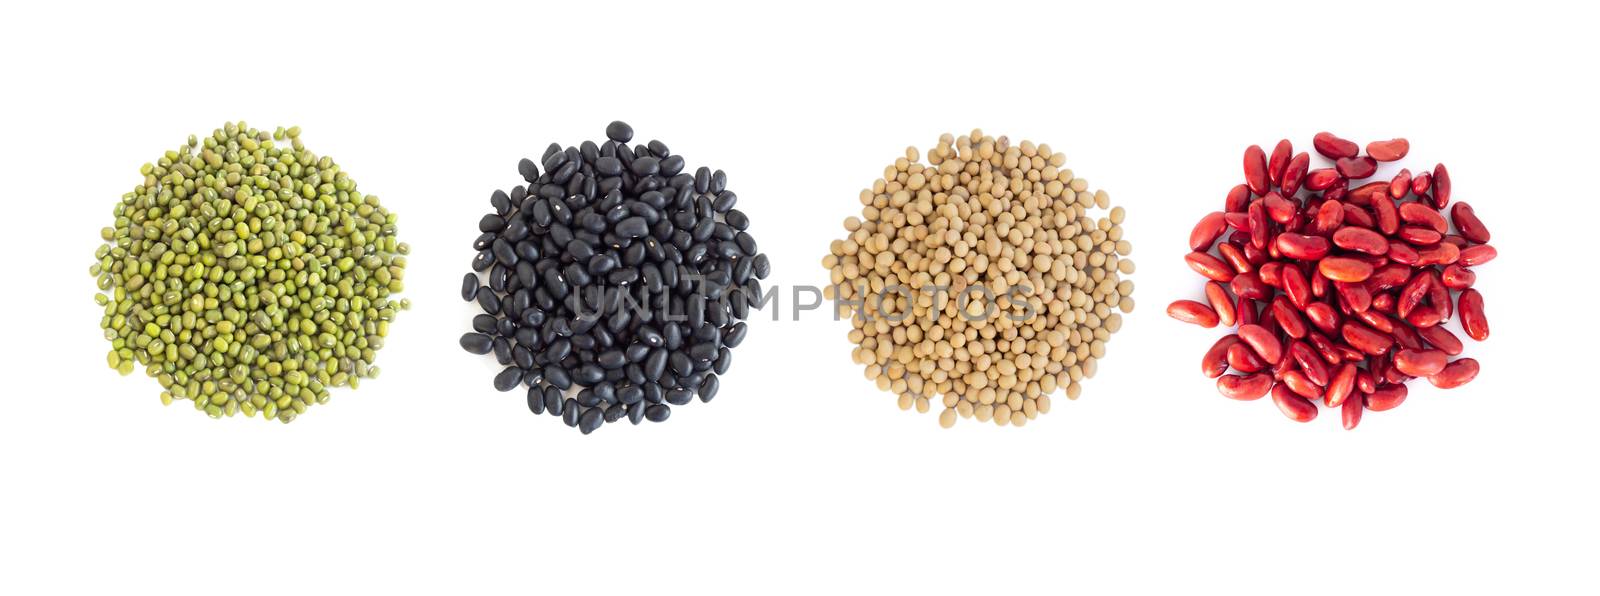 Mix beans isolated on white background, healthy food concept by pt.pongsak@gmail.com